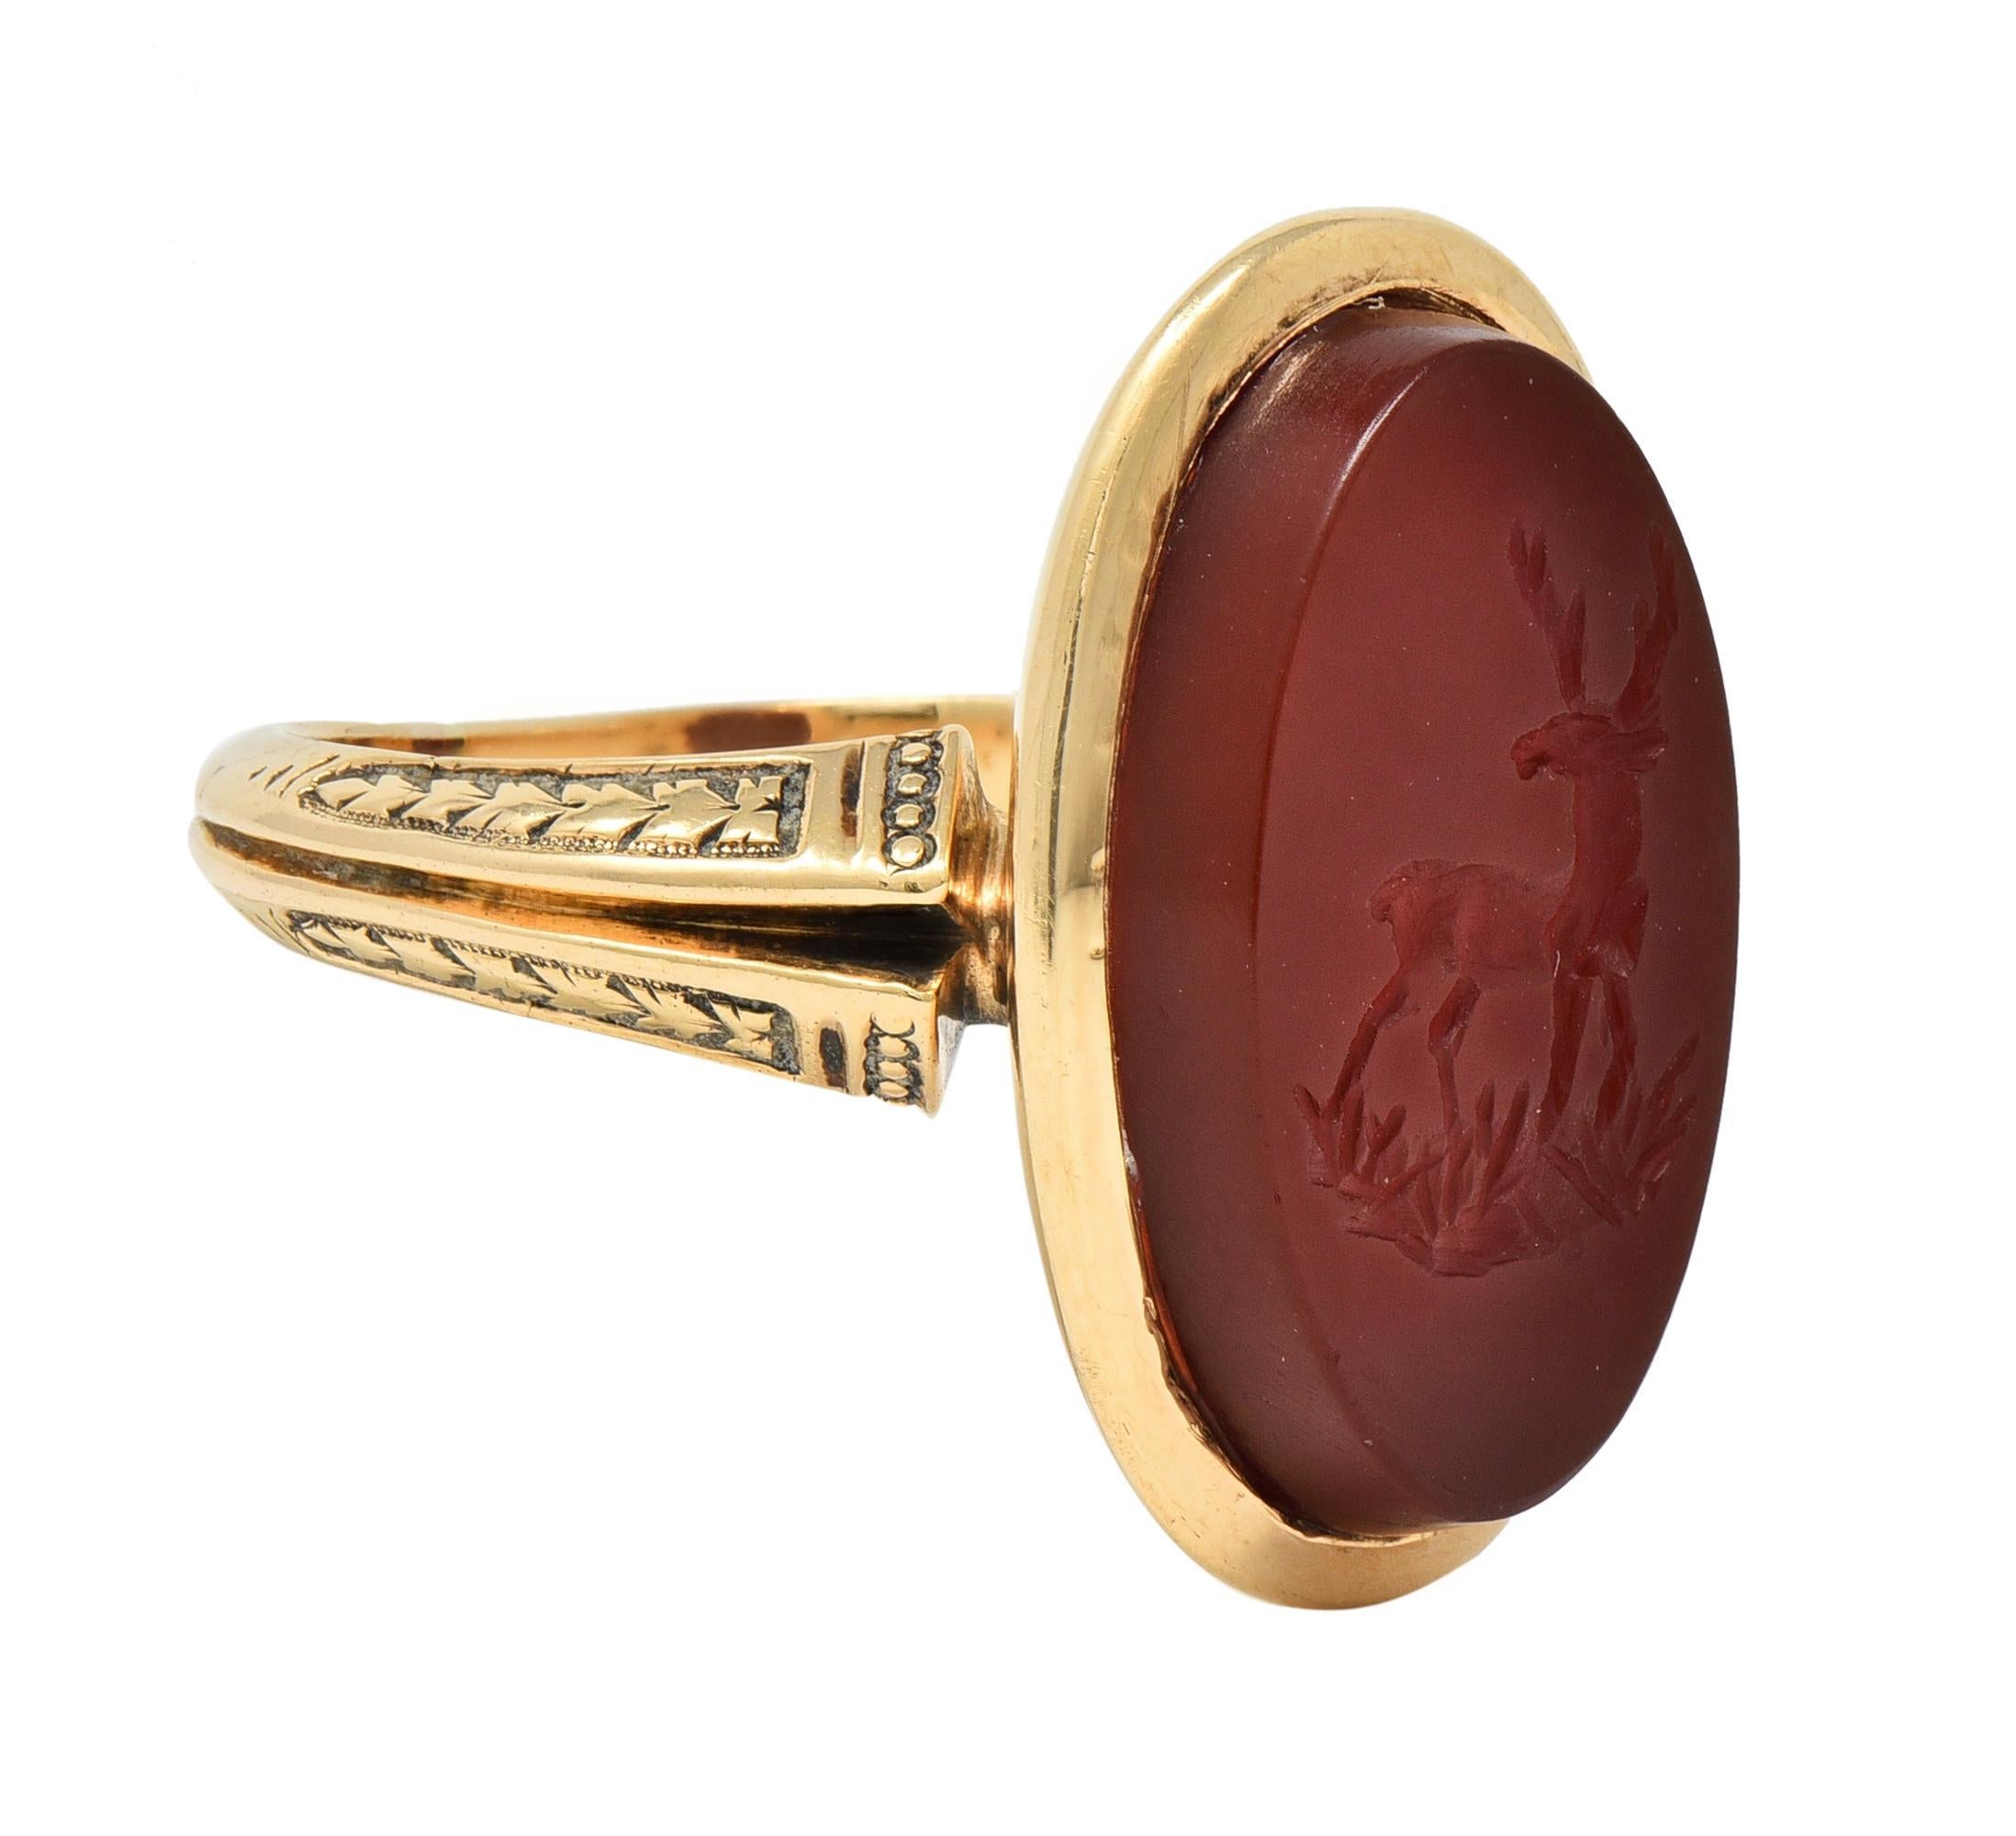 Centering an oval-shaped tablet of carved carnelian measuring 10.0 x 17.5 mm 
Translucent orangey red in color - carved with an intaglio of a stag deer 
With a recessed gold surround flanked by pierced flaring shoulders
Engraved with a decorative